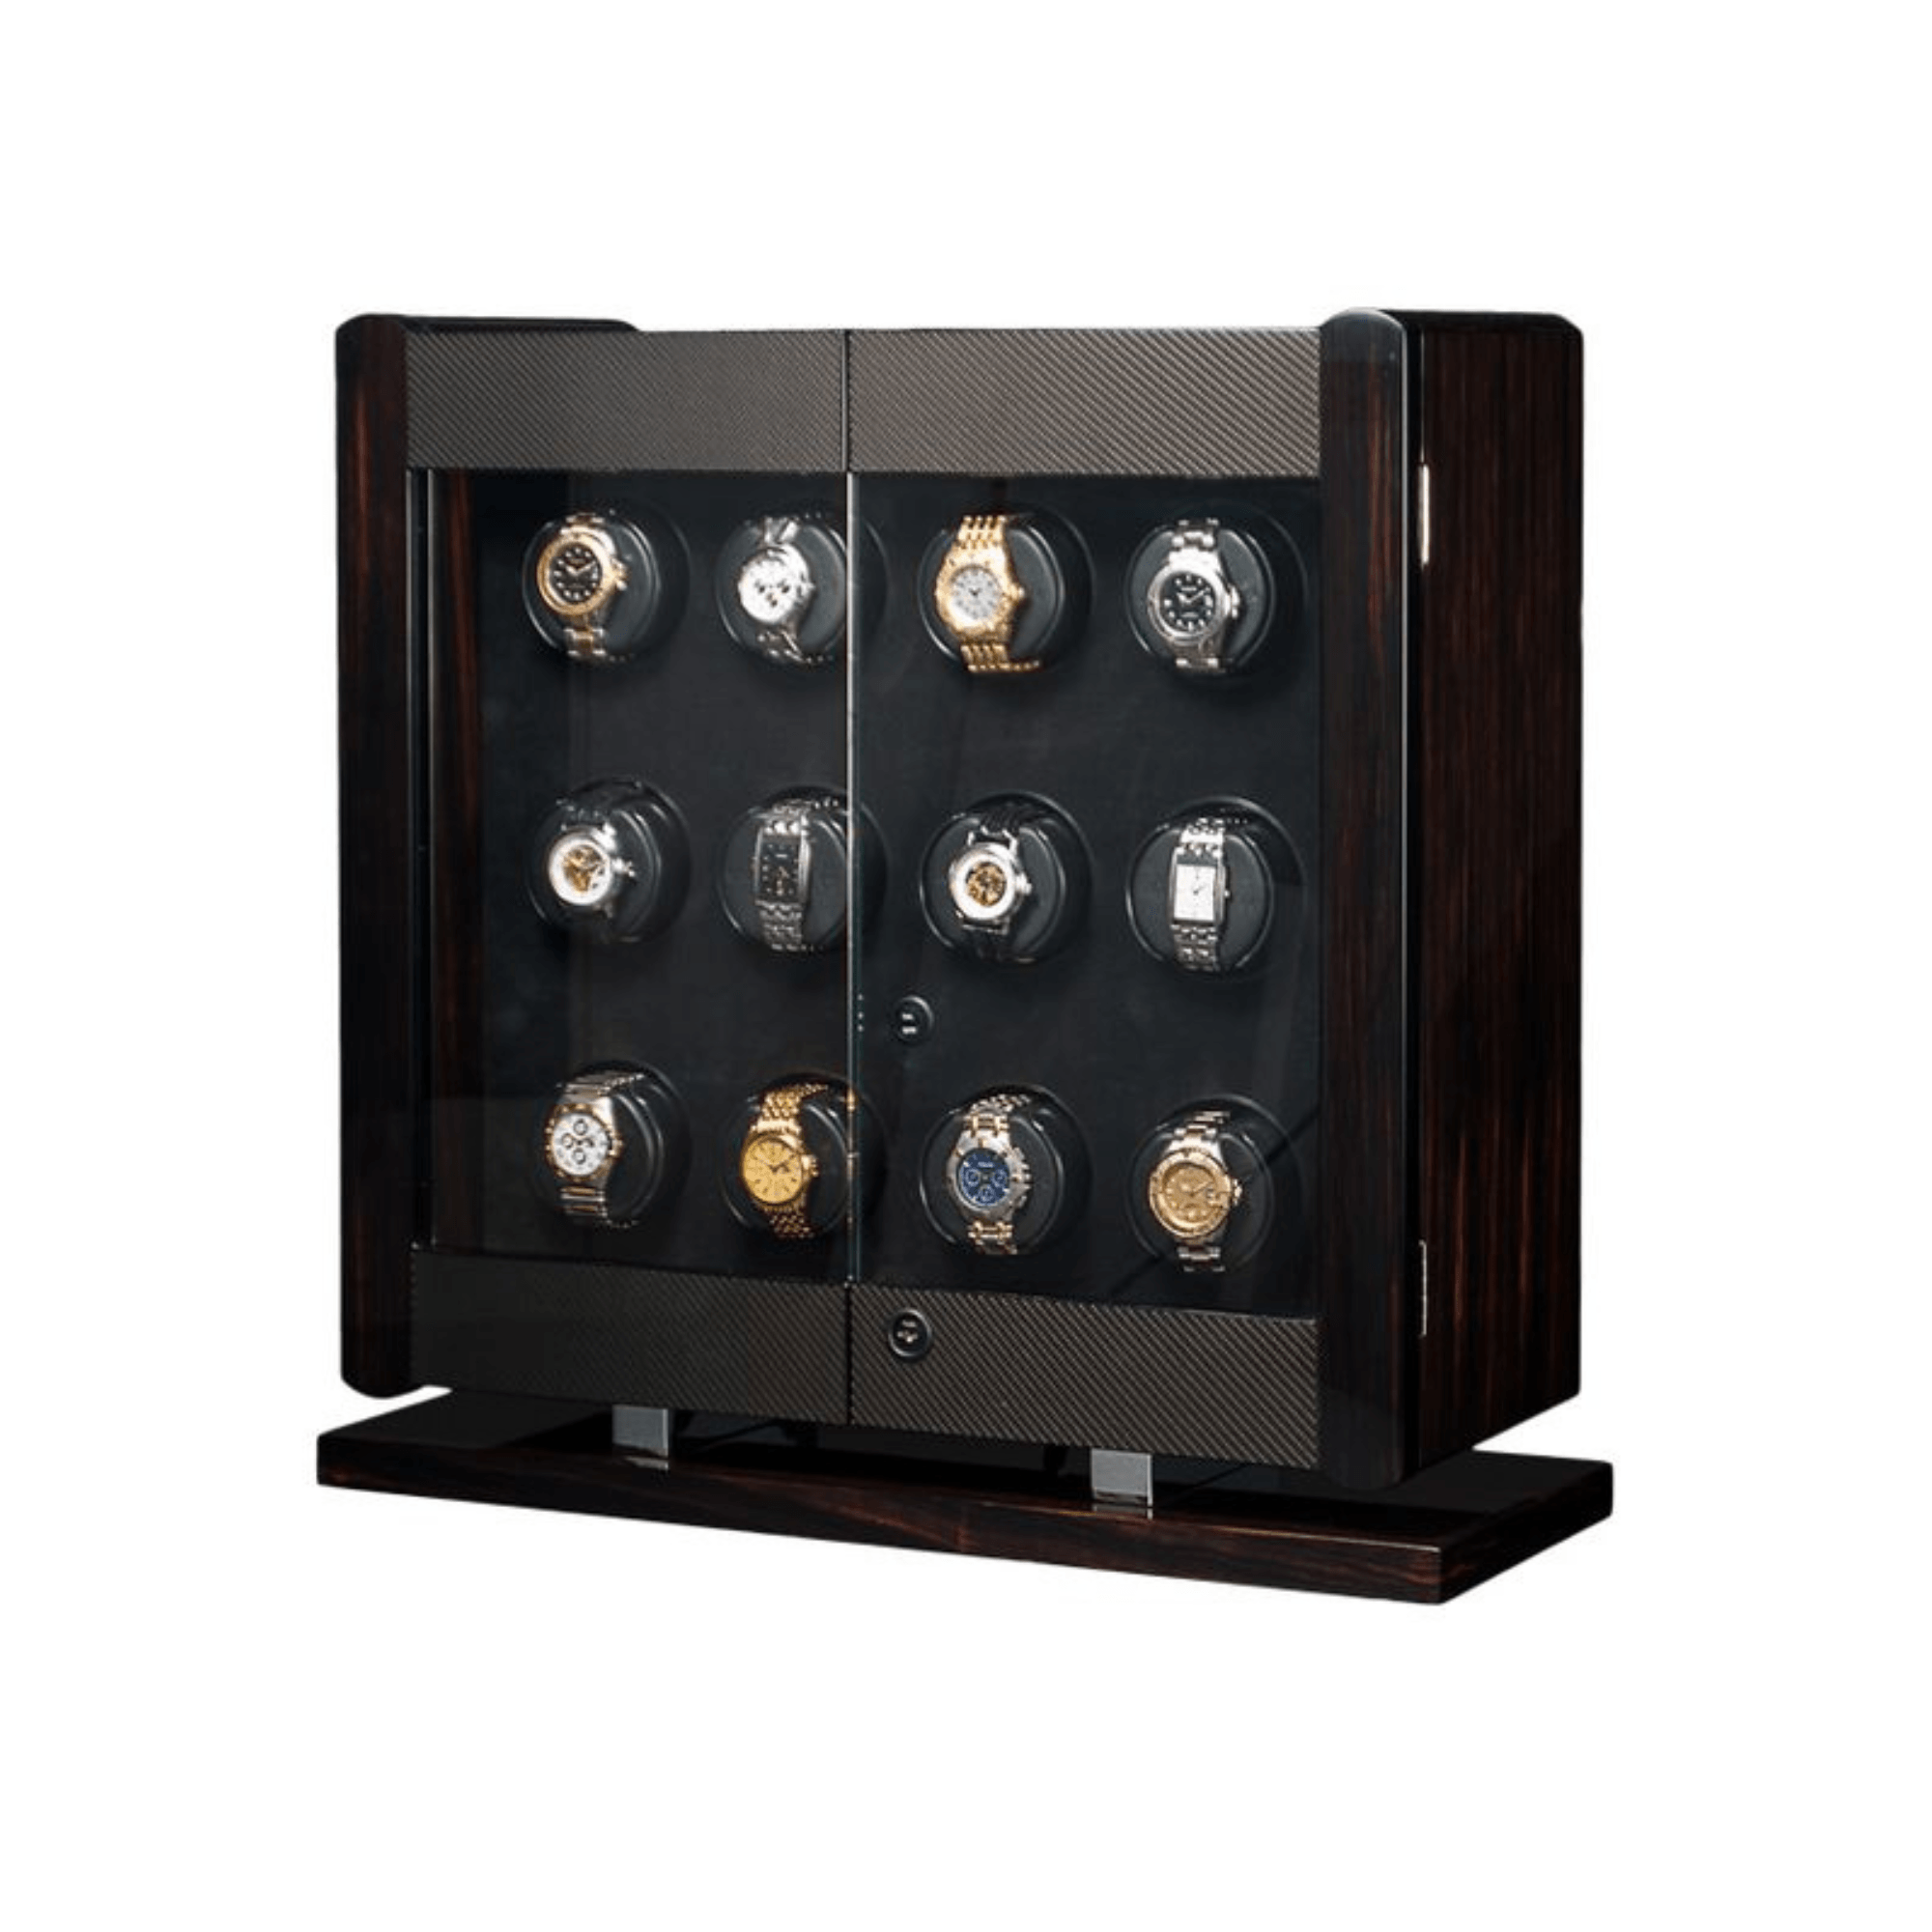 The Pros and Cons of Having Watch Winder: Should You Get It?